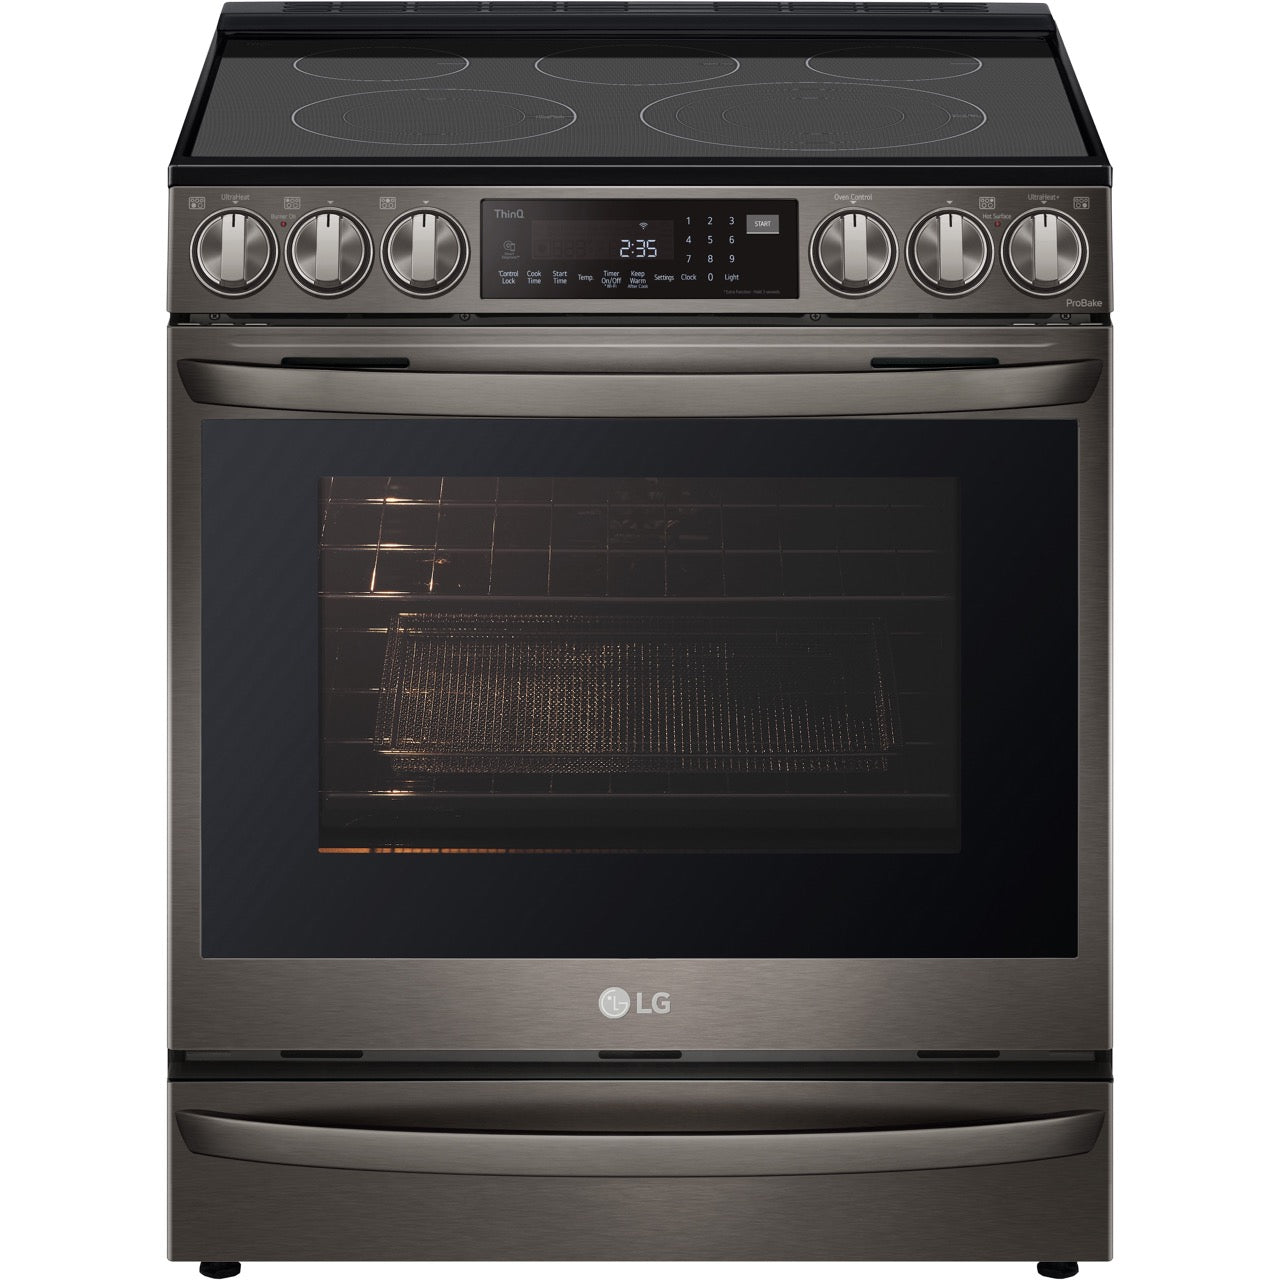 LG 6.3-Cu. Ft. Smart Wi-Fi Enabled ProBake Convection InstaView Electric Slide-in Range with Air Fry, Black Stainless Steel (LSEL6337D)